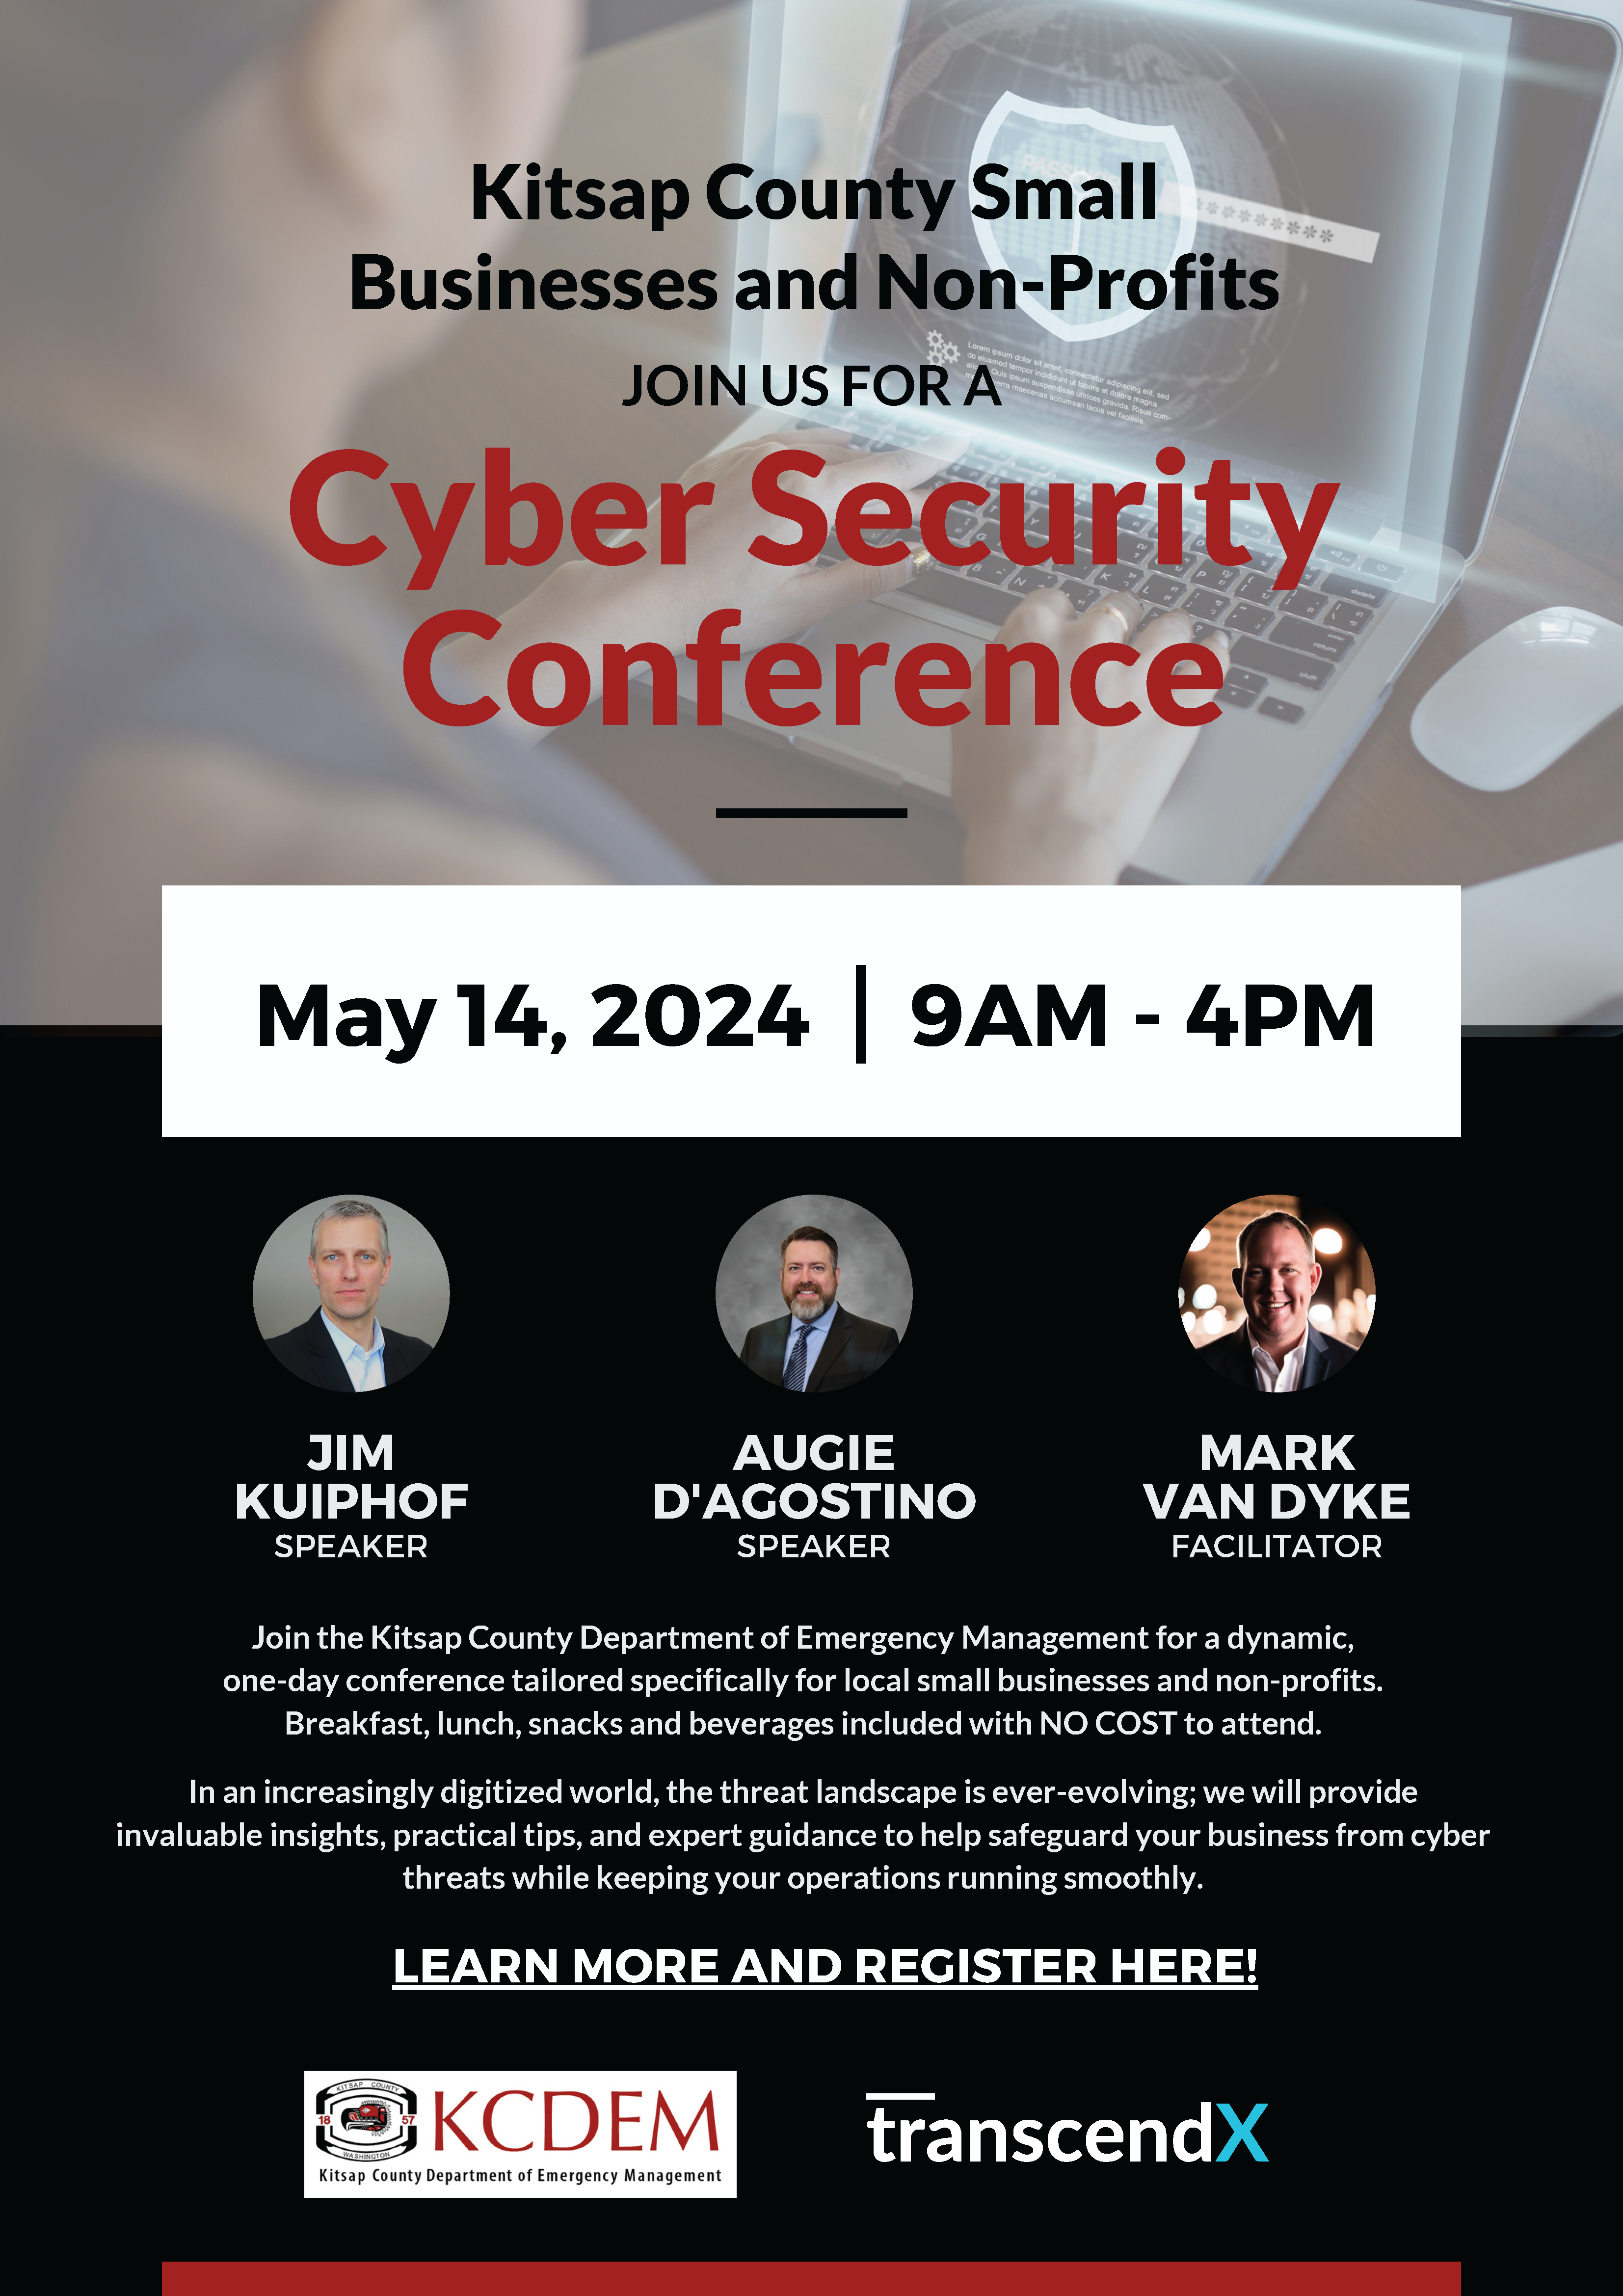 Kitsap Cyber Security Conference May 14